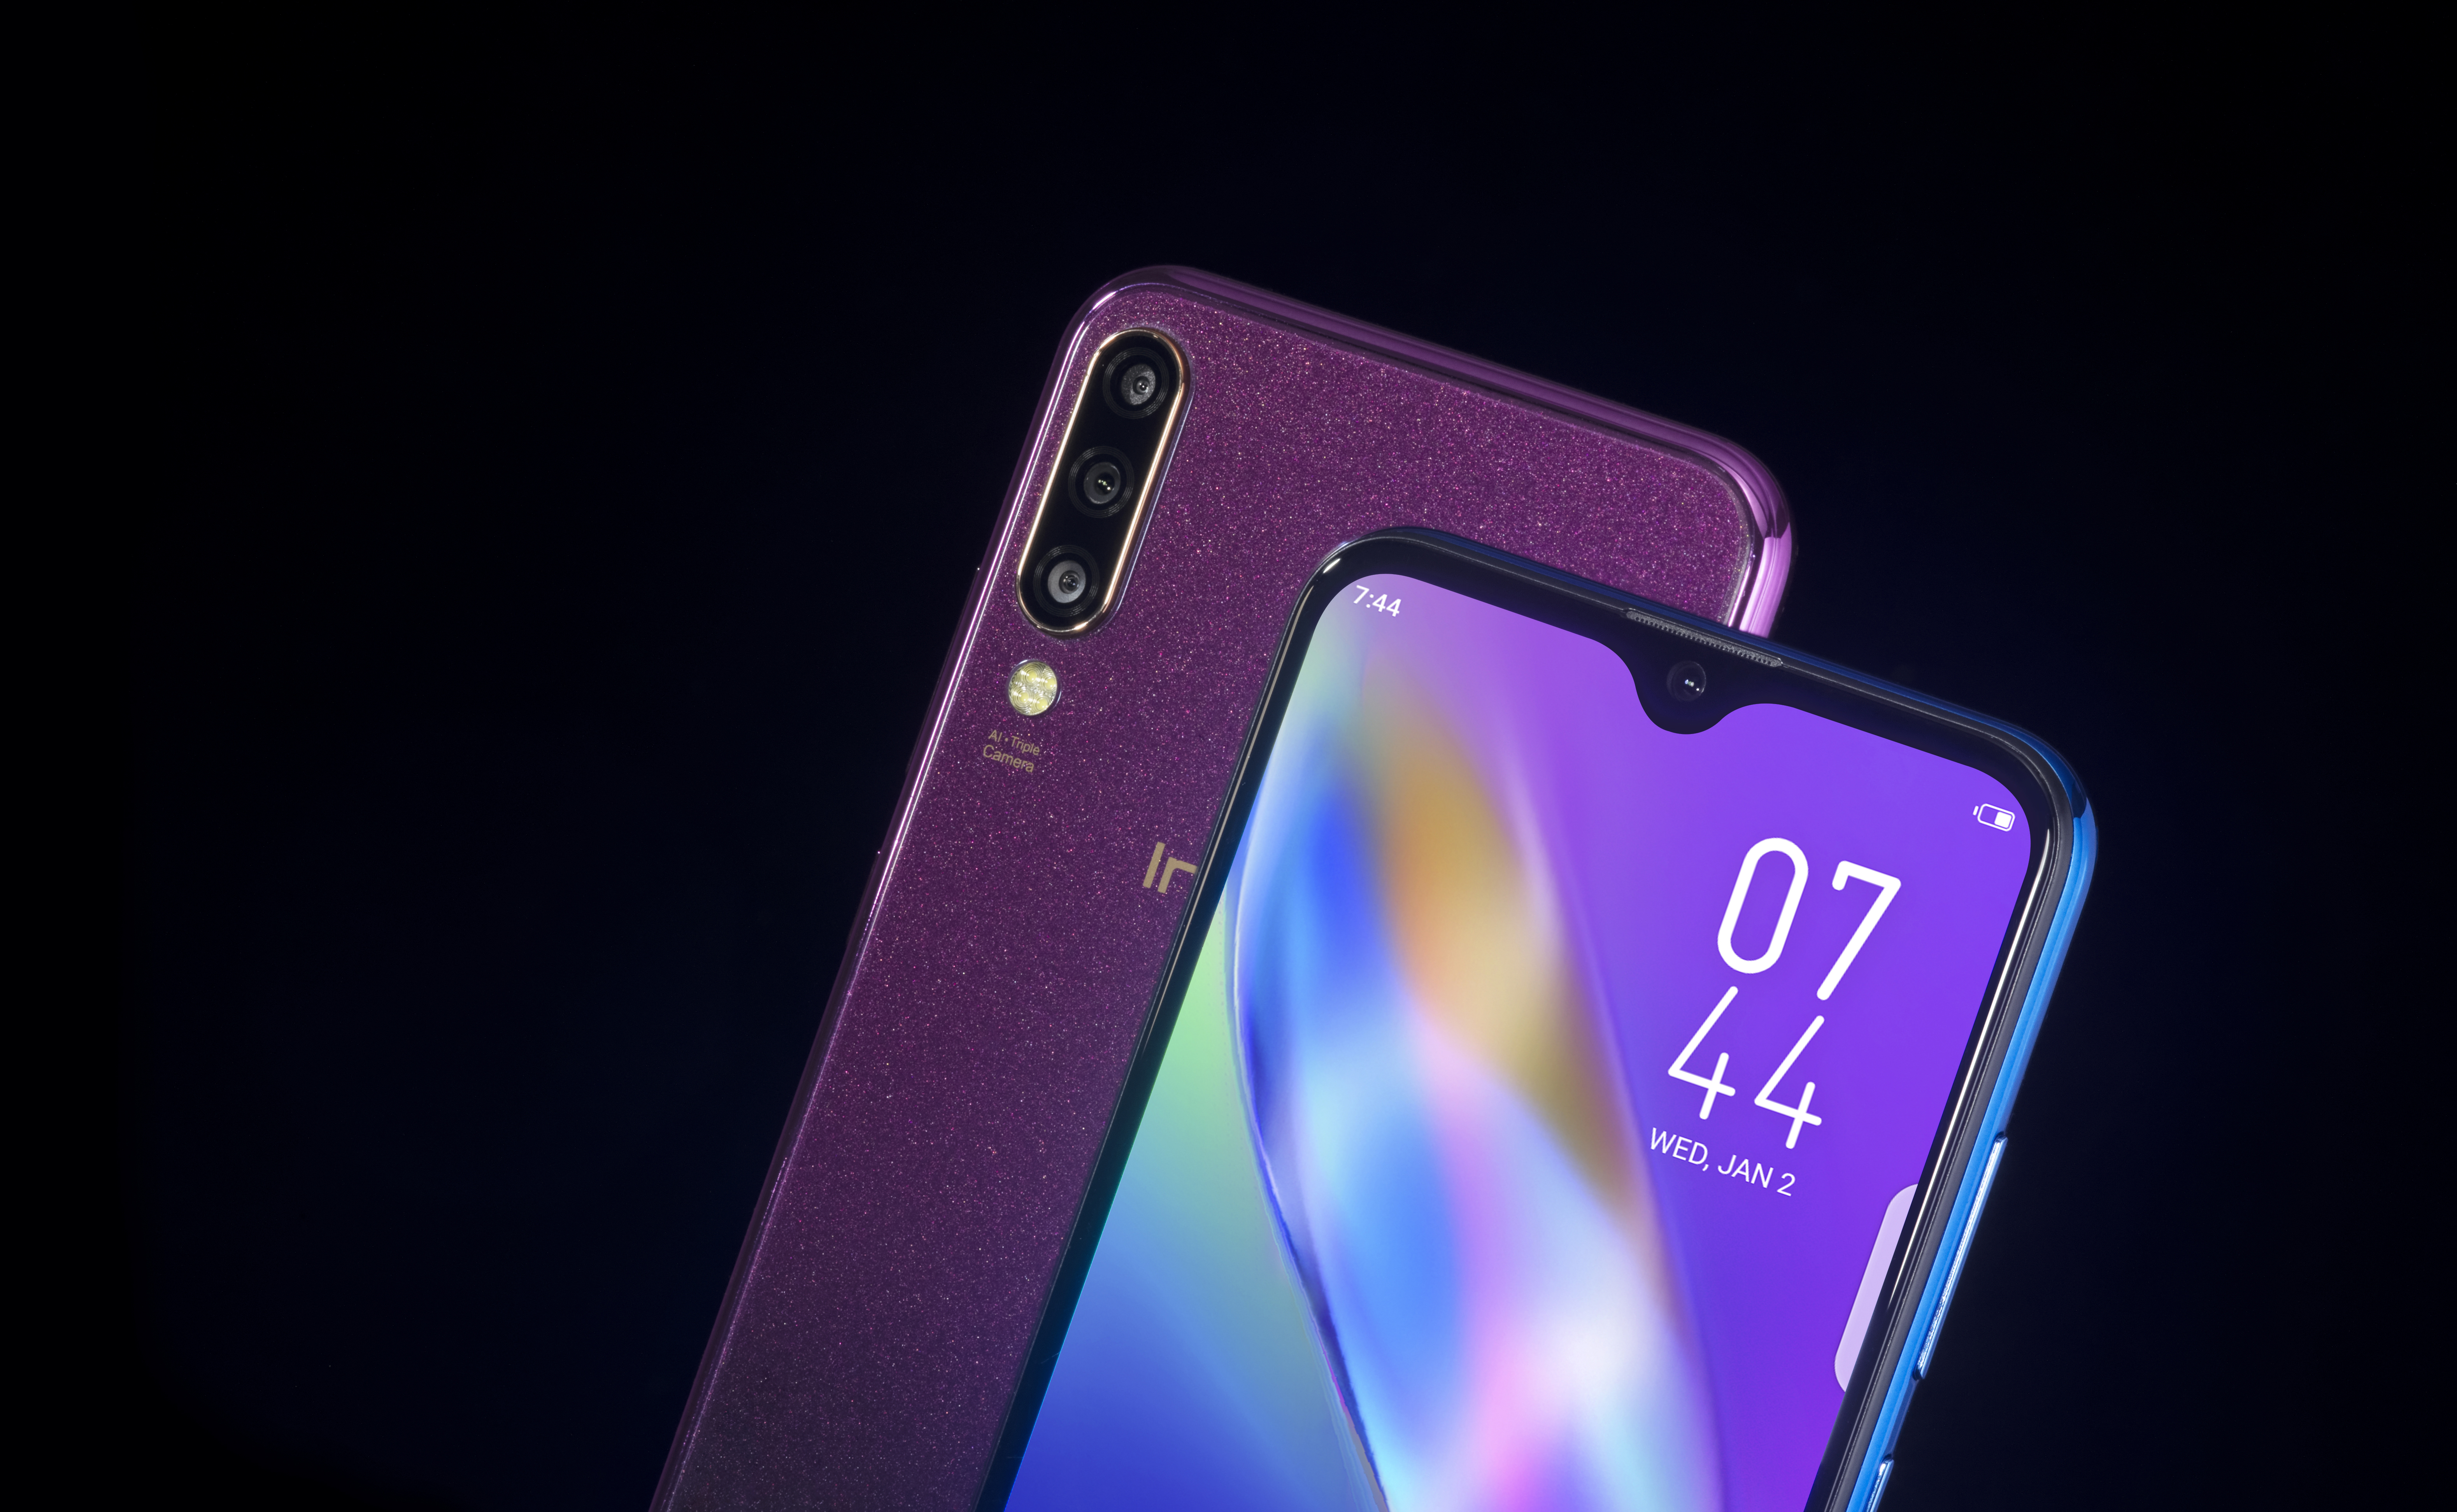 Get your hands on this Infinix Selfie Superstar which has an unbelievably high pixel camera and is expected to be the hottest phone of 2019